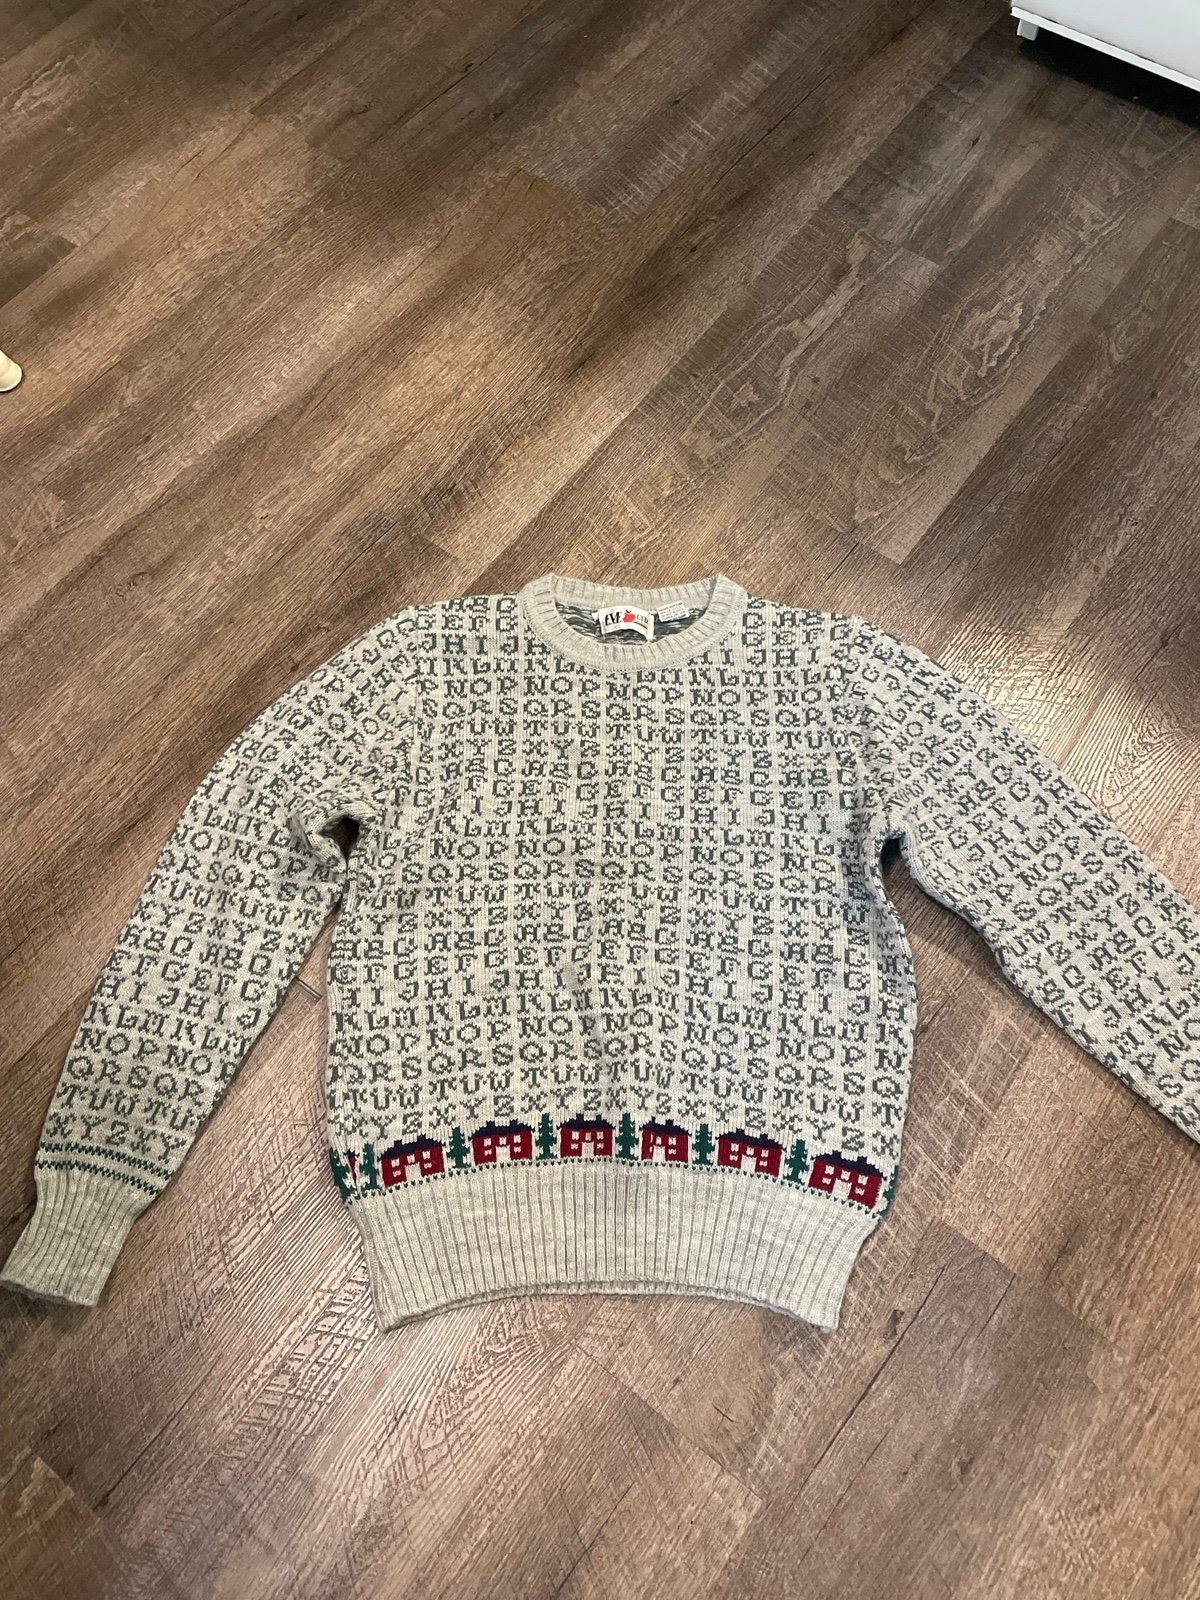 Special offer  Vintage sweater lot N3OWajGnV well sale